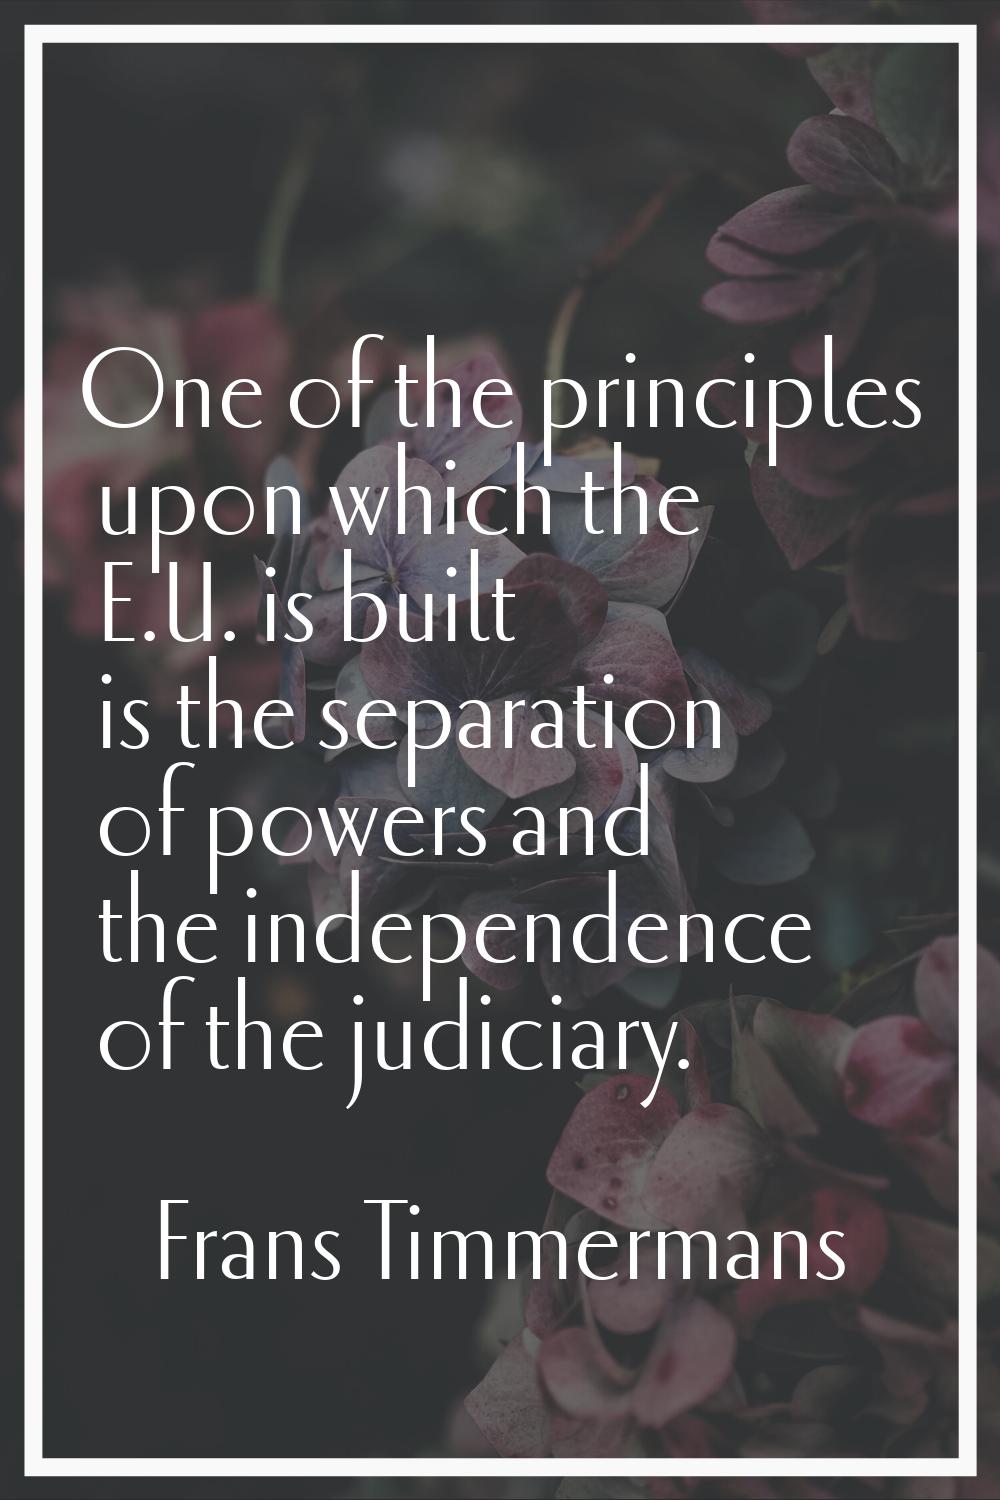 One of the principles upon which the E.U. is built is the separation of powers and the independence